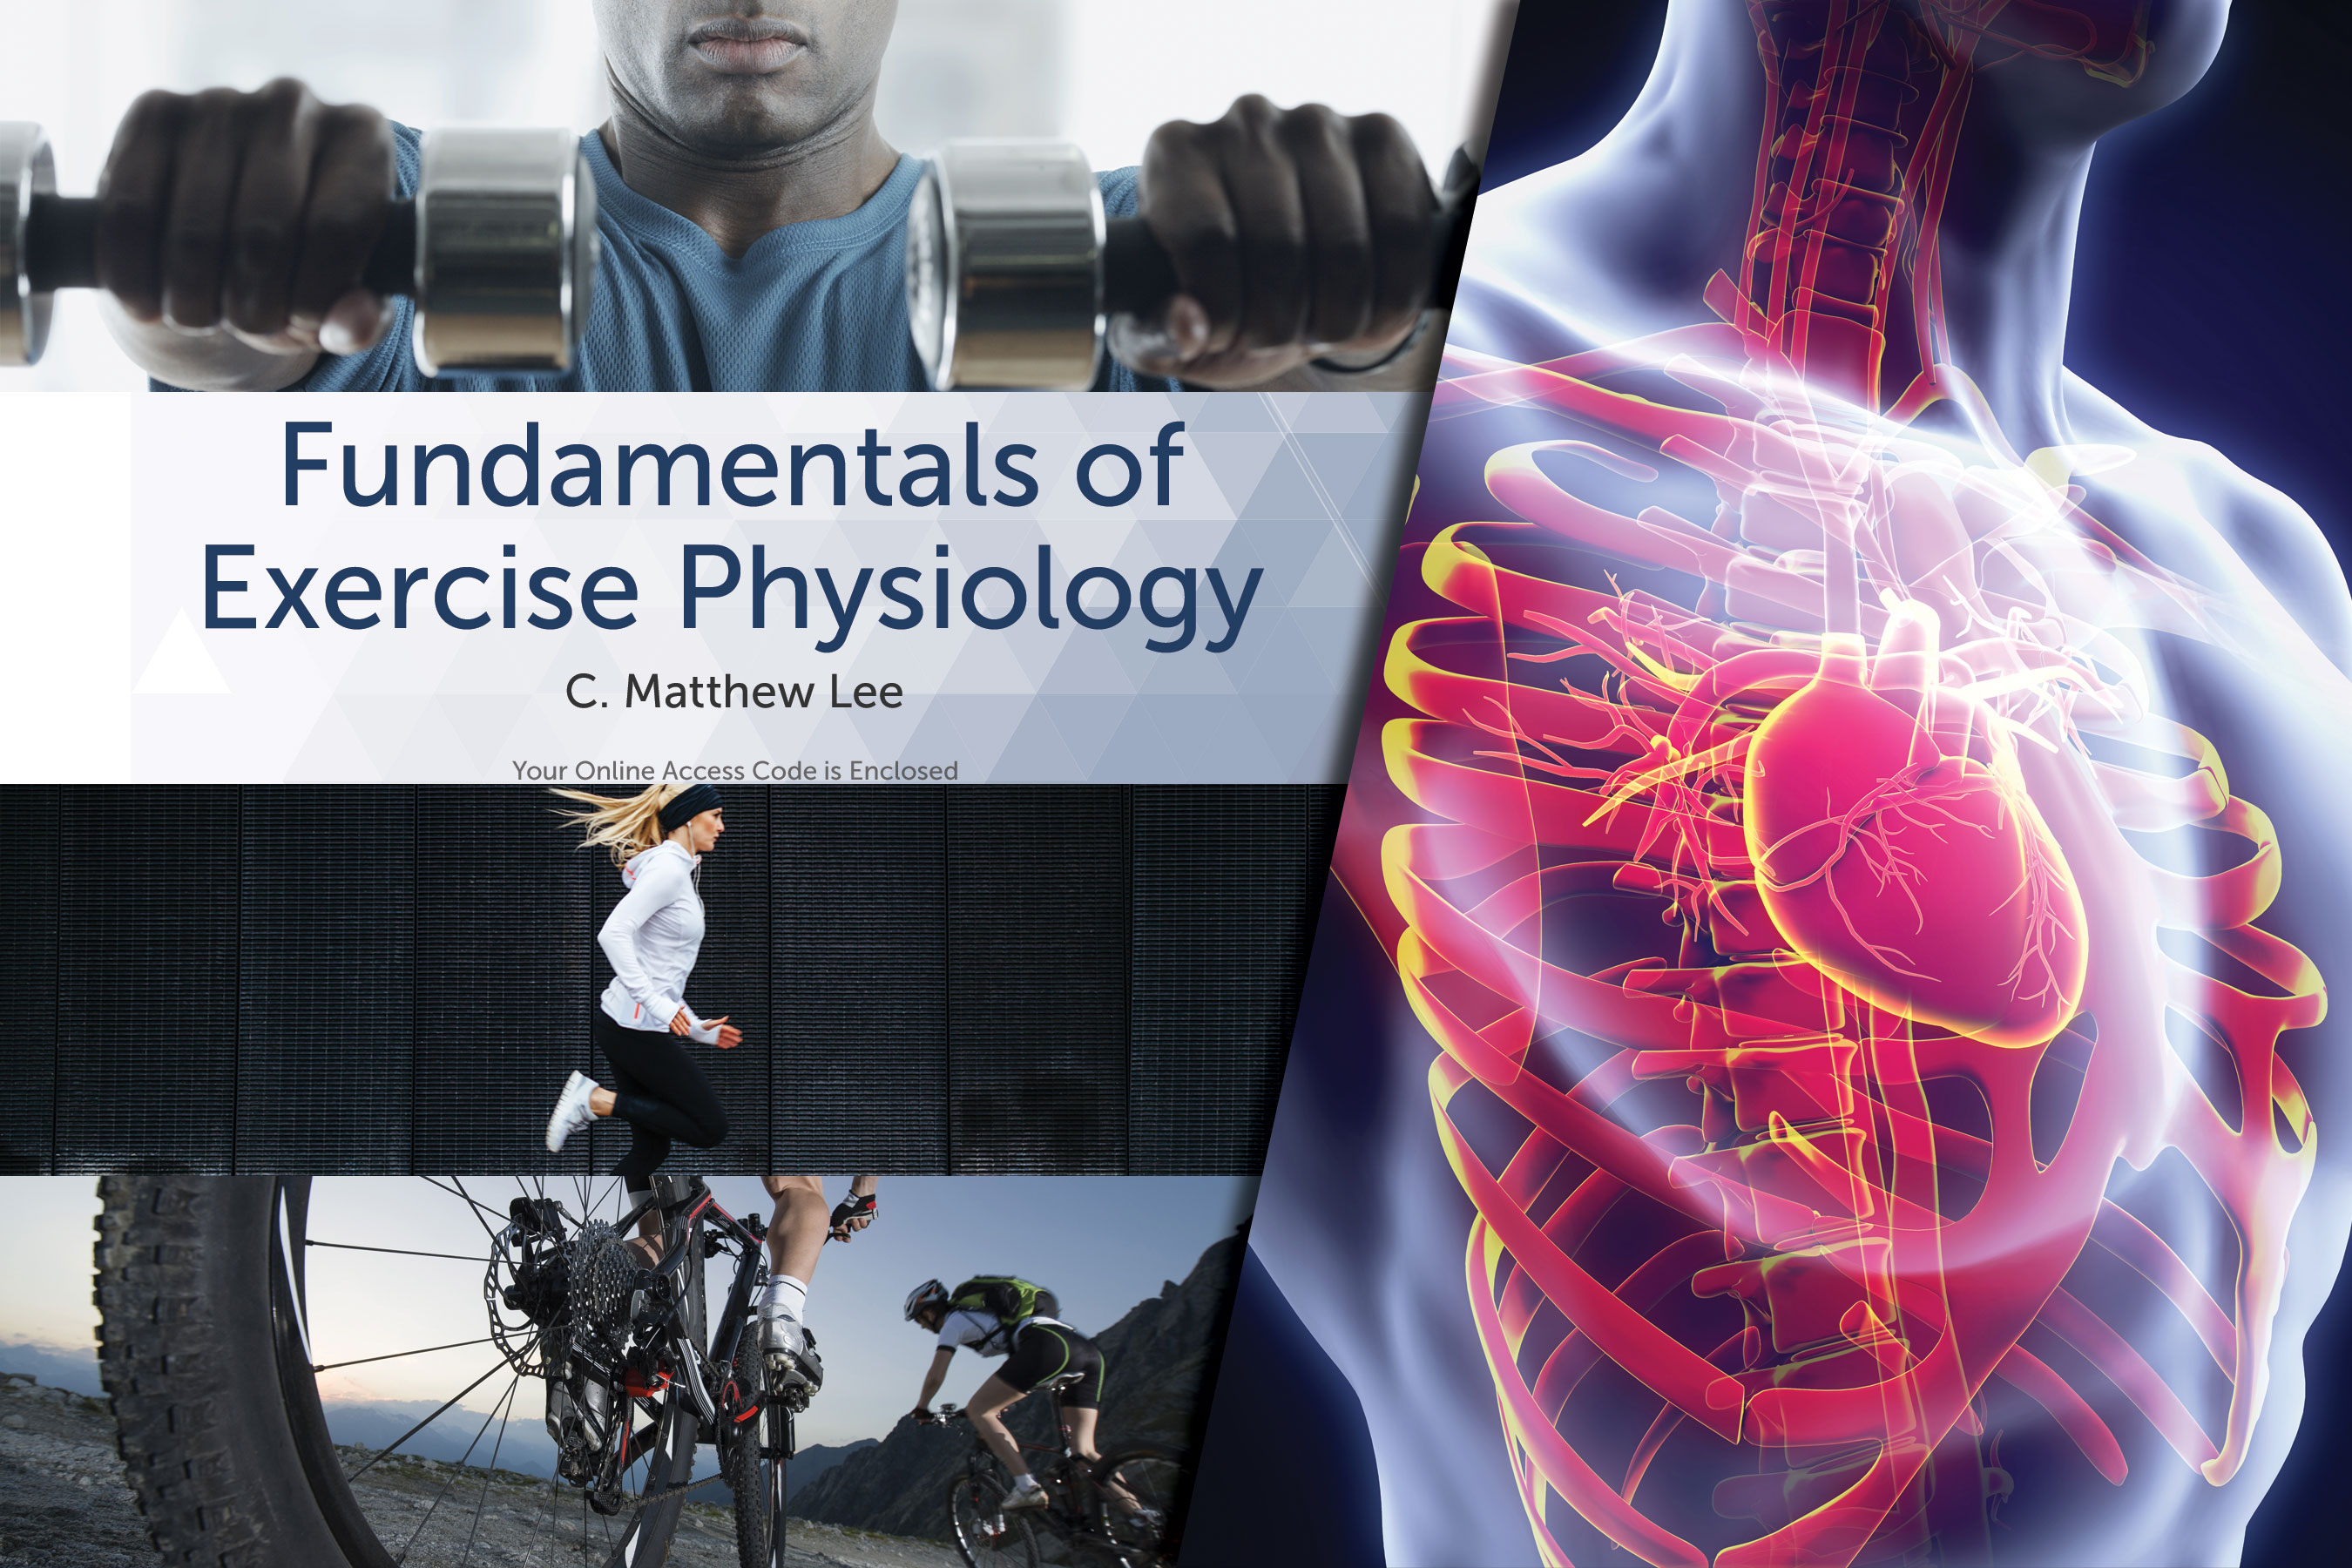 Clinical Exercise Physiology - University of Wisconsin River Falls